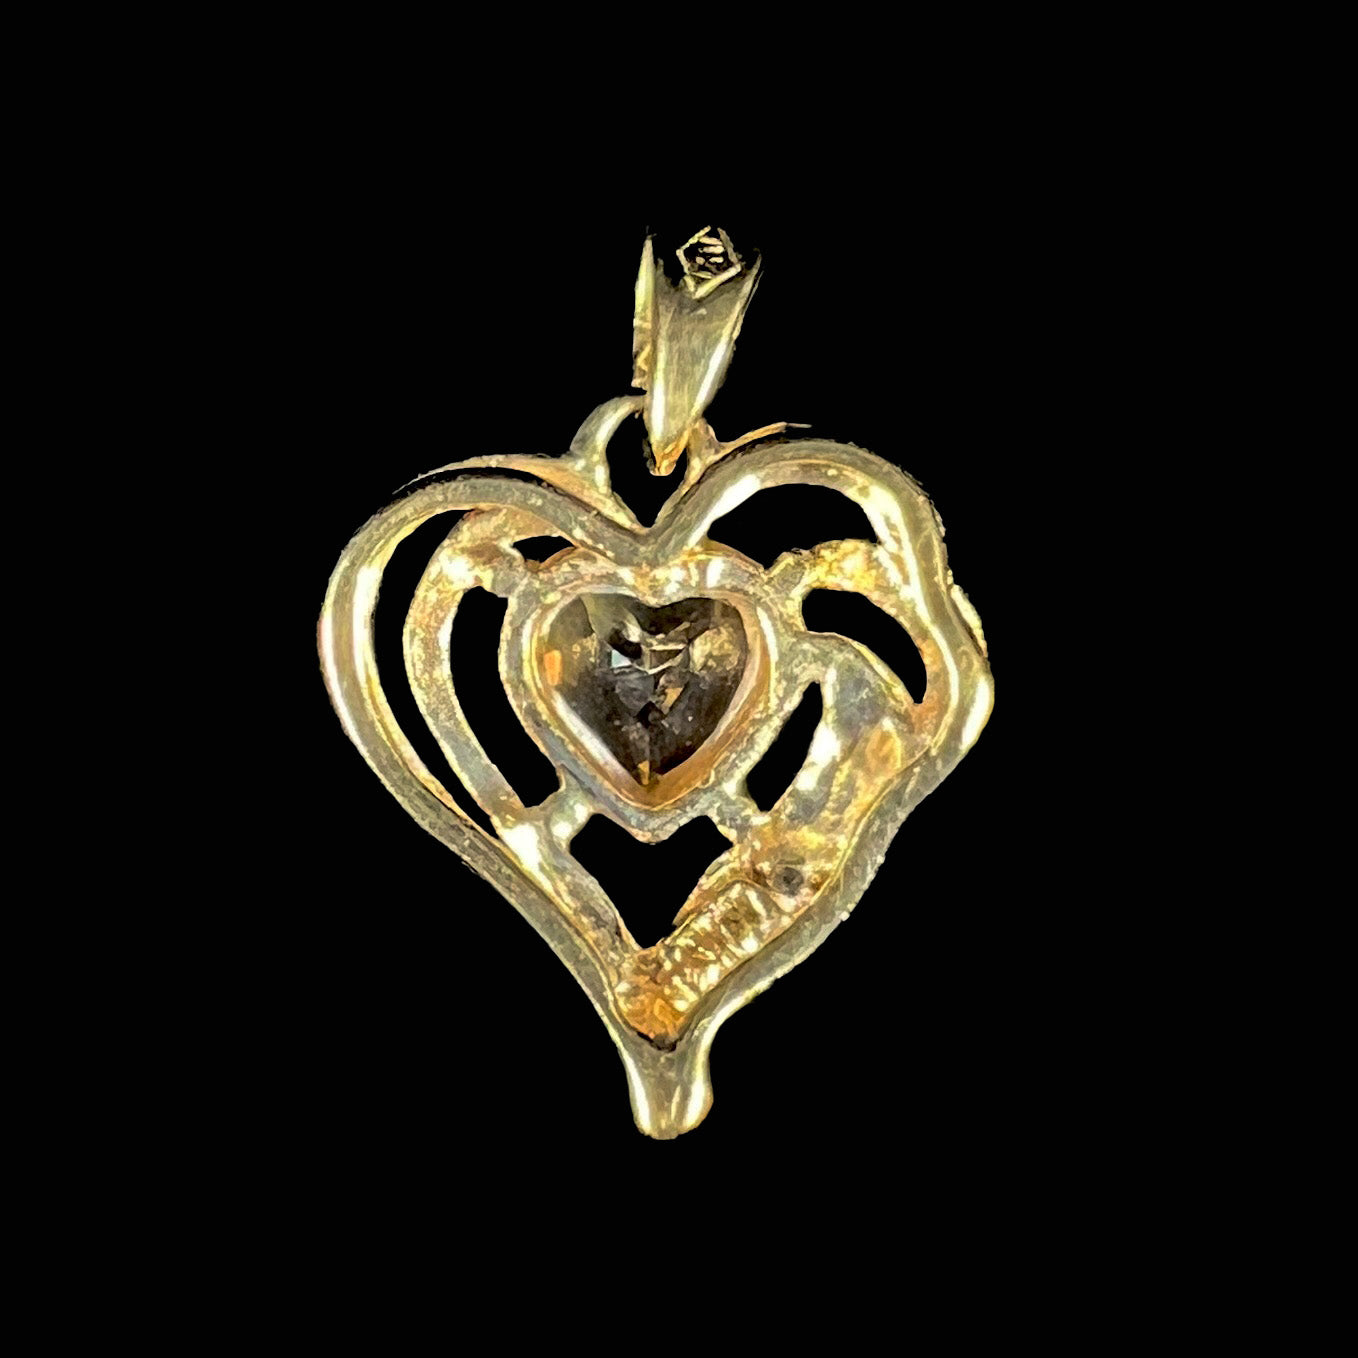 A ladies' yellow gold pendant set with a heart cut citrine stone and a diamond accent.